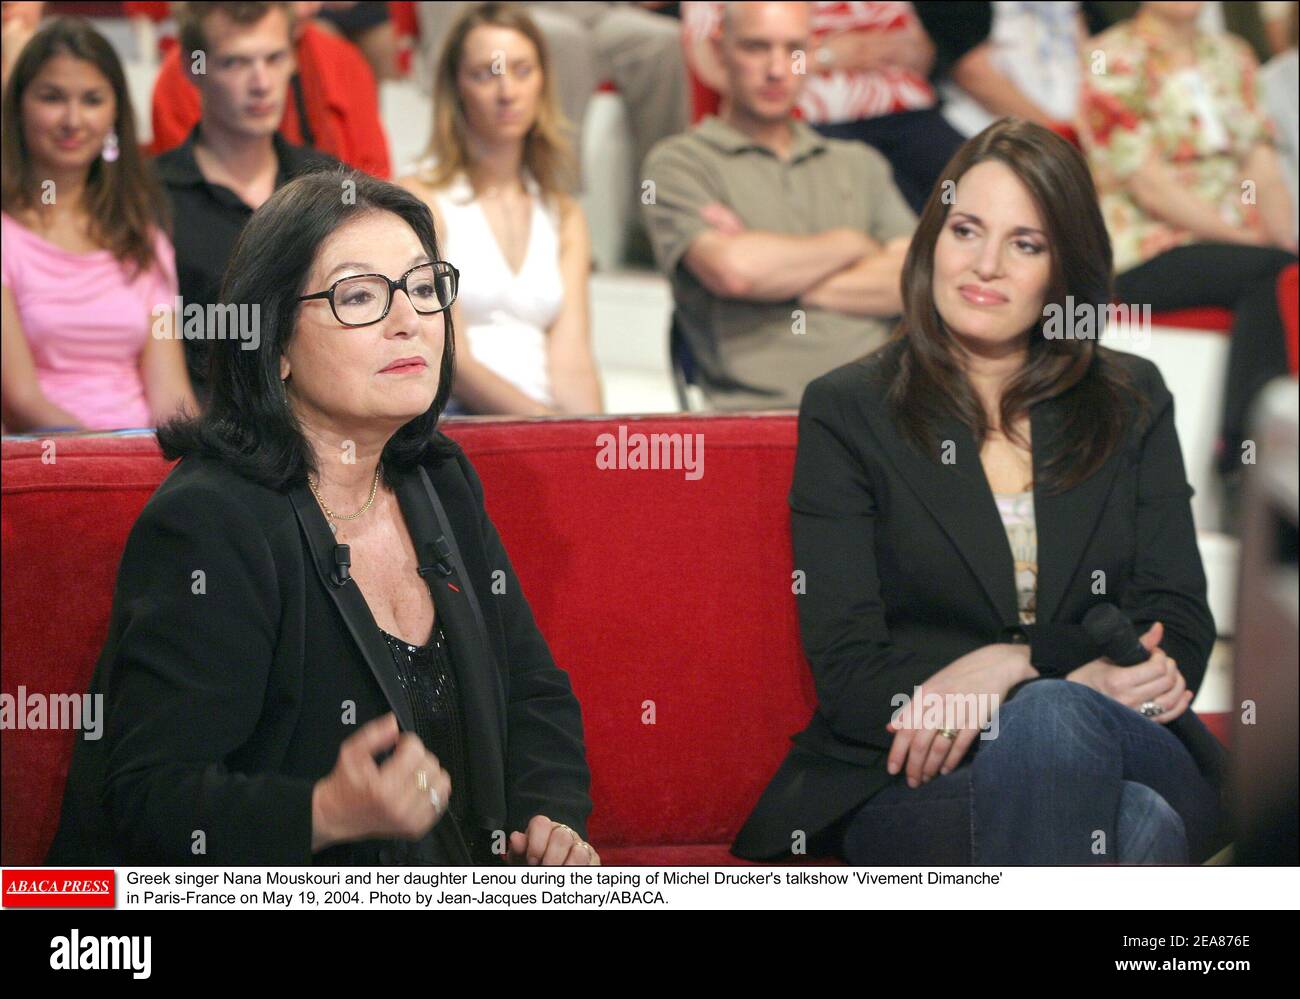 Greek singer Nana Mouskouri and her daughter Lenou during the taping of Michel Drucker's talkshow 'Vivement Dimanche' in Paris-France on May 19, 2004. Photo by Jean-Jacques Datchary/ABACA. Stock Photo